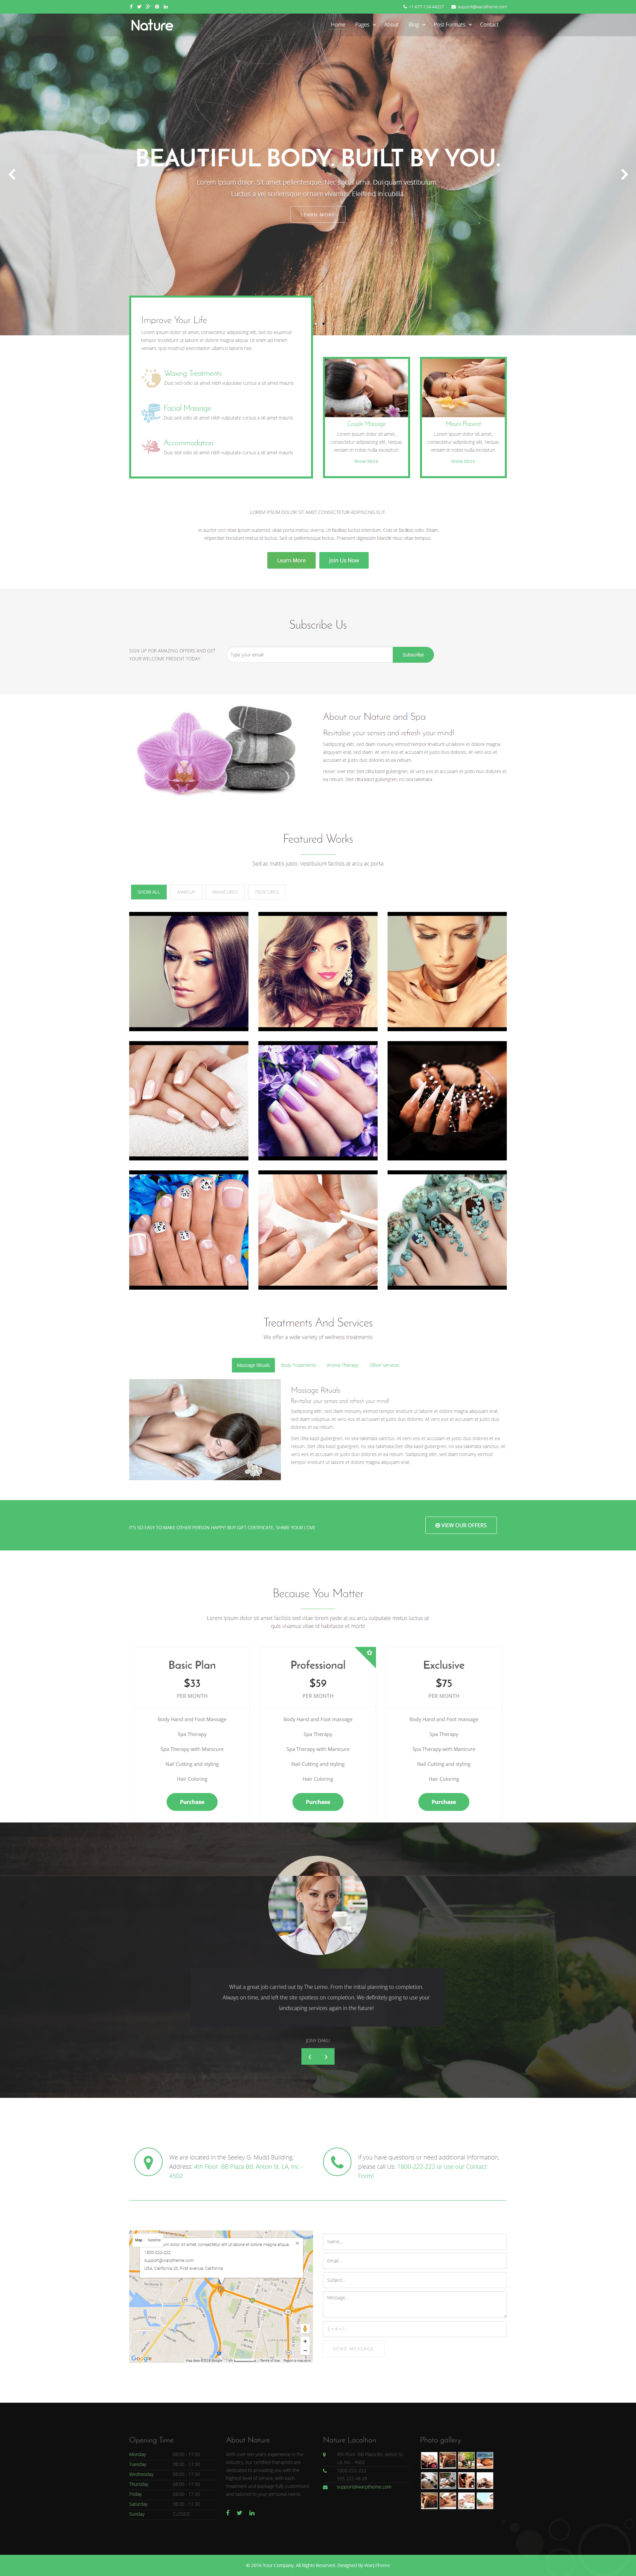 Free Adult Site Templates 112